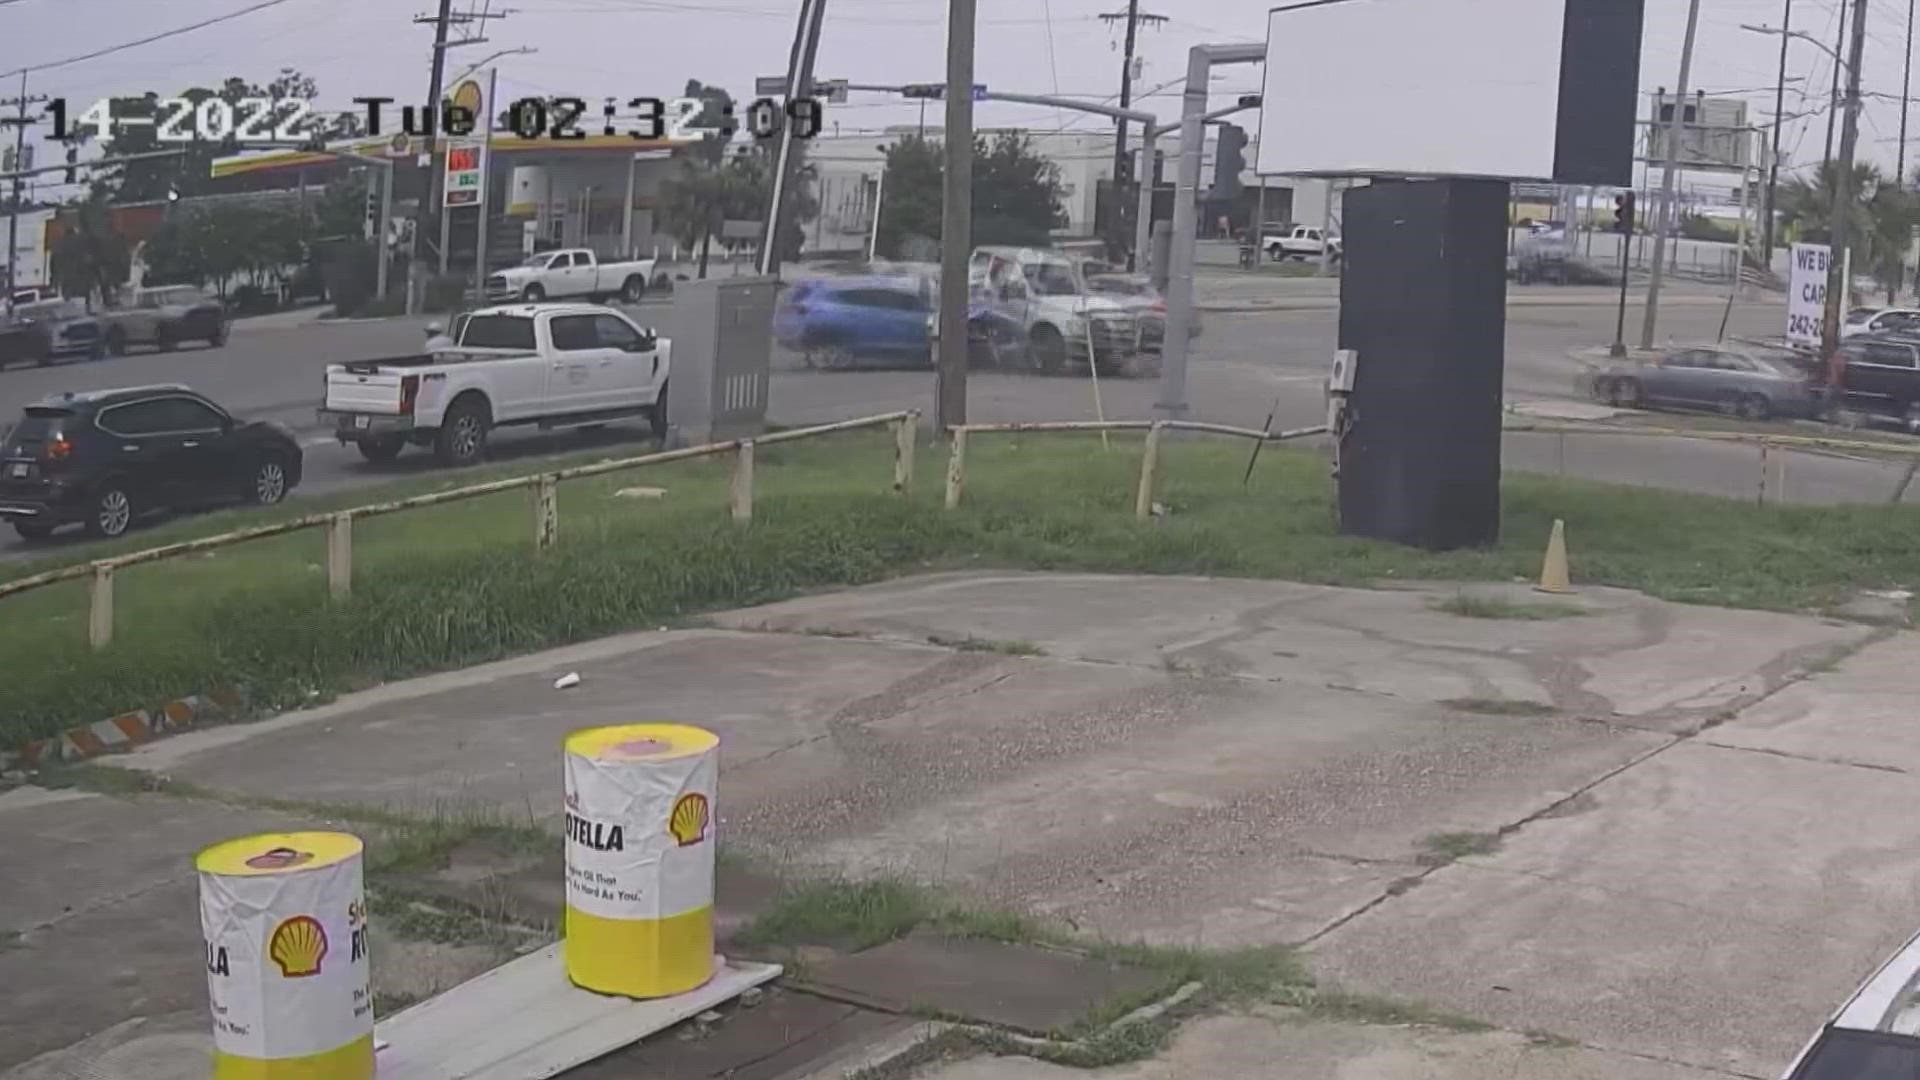 A car running a red light may have been evading police before it caused a multi-vehicle collision in New Orleans East, Mike McDaniel reports